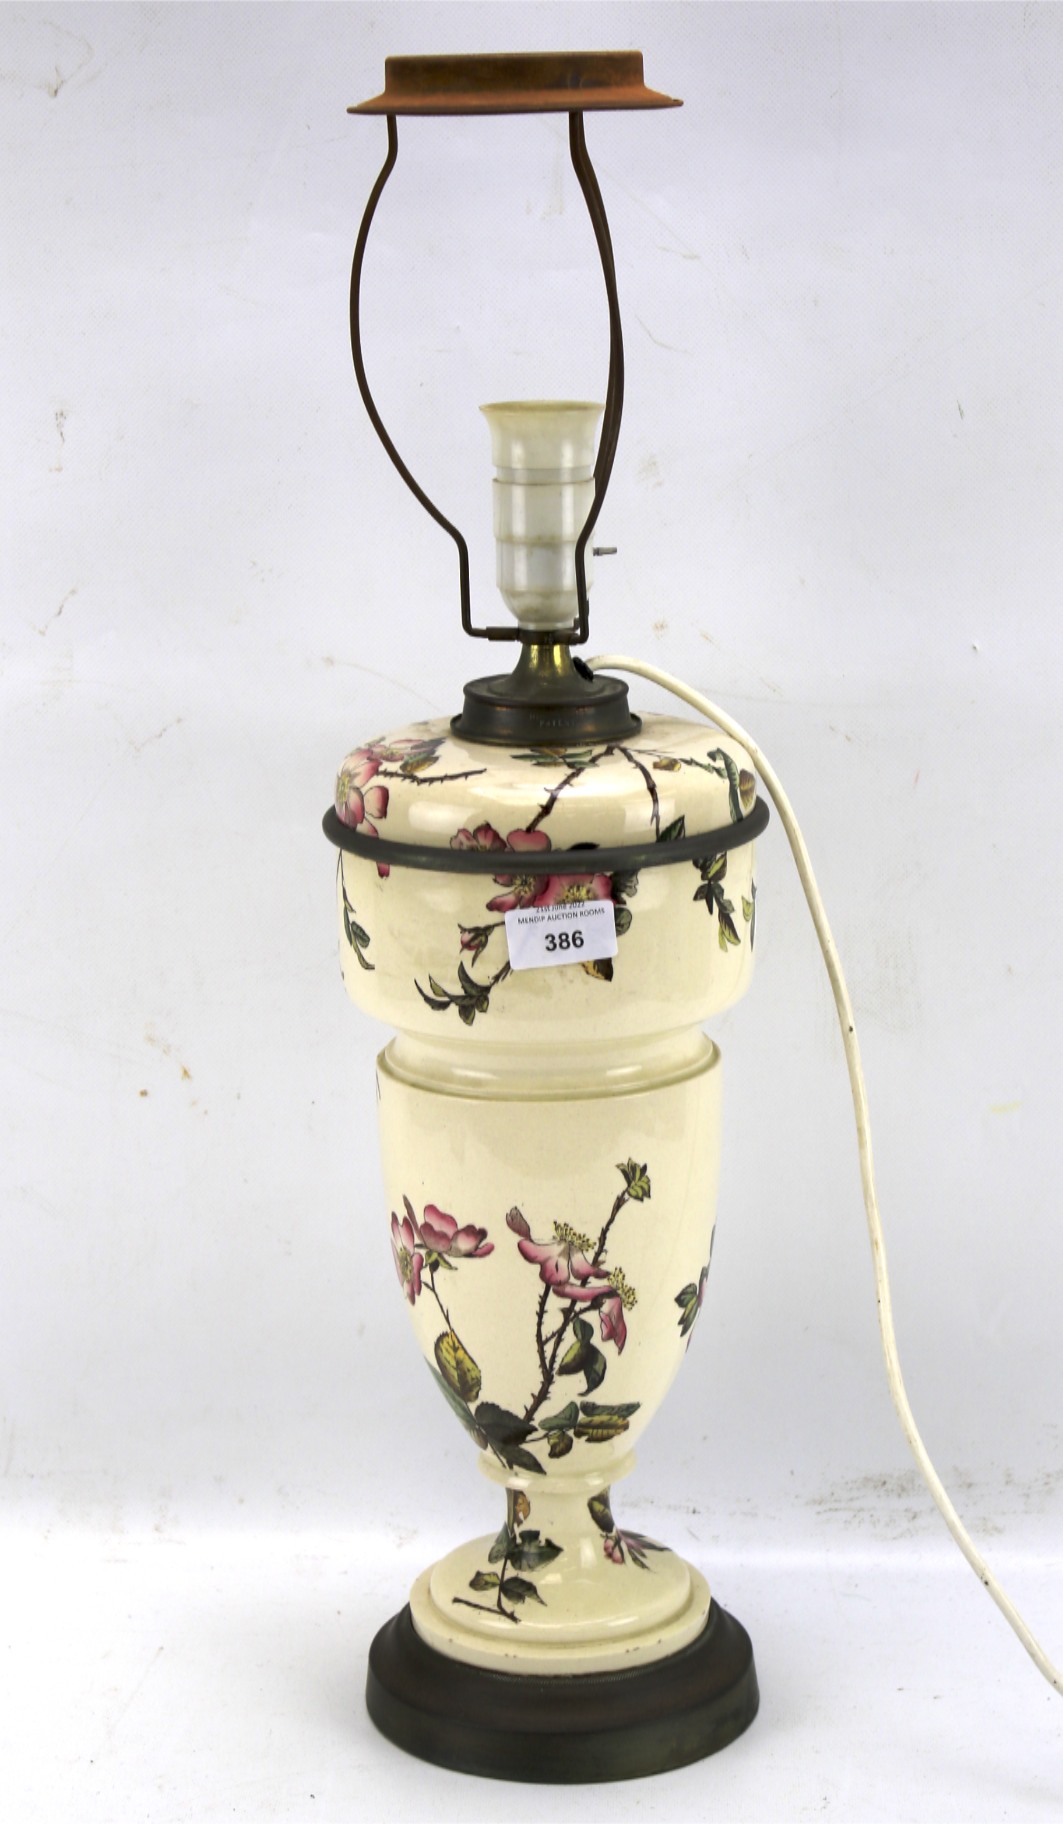 A late 19th century Bria & Sons ceramic adapted table lamp.